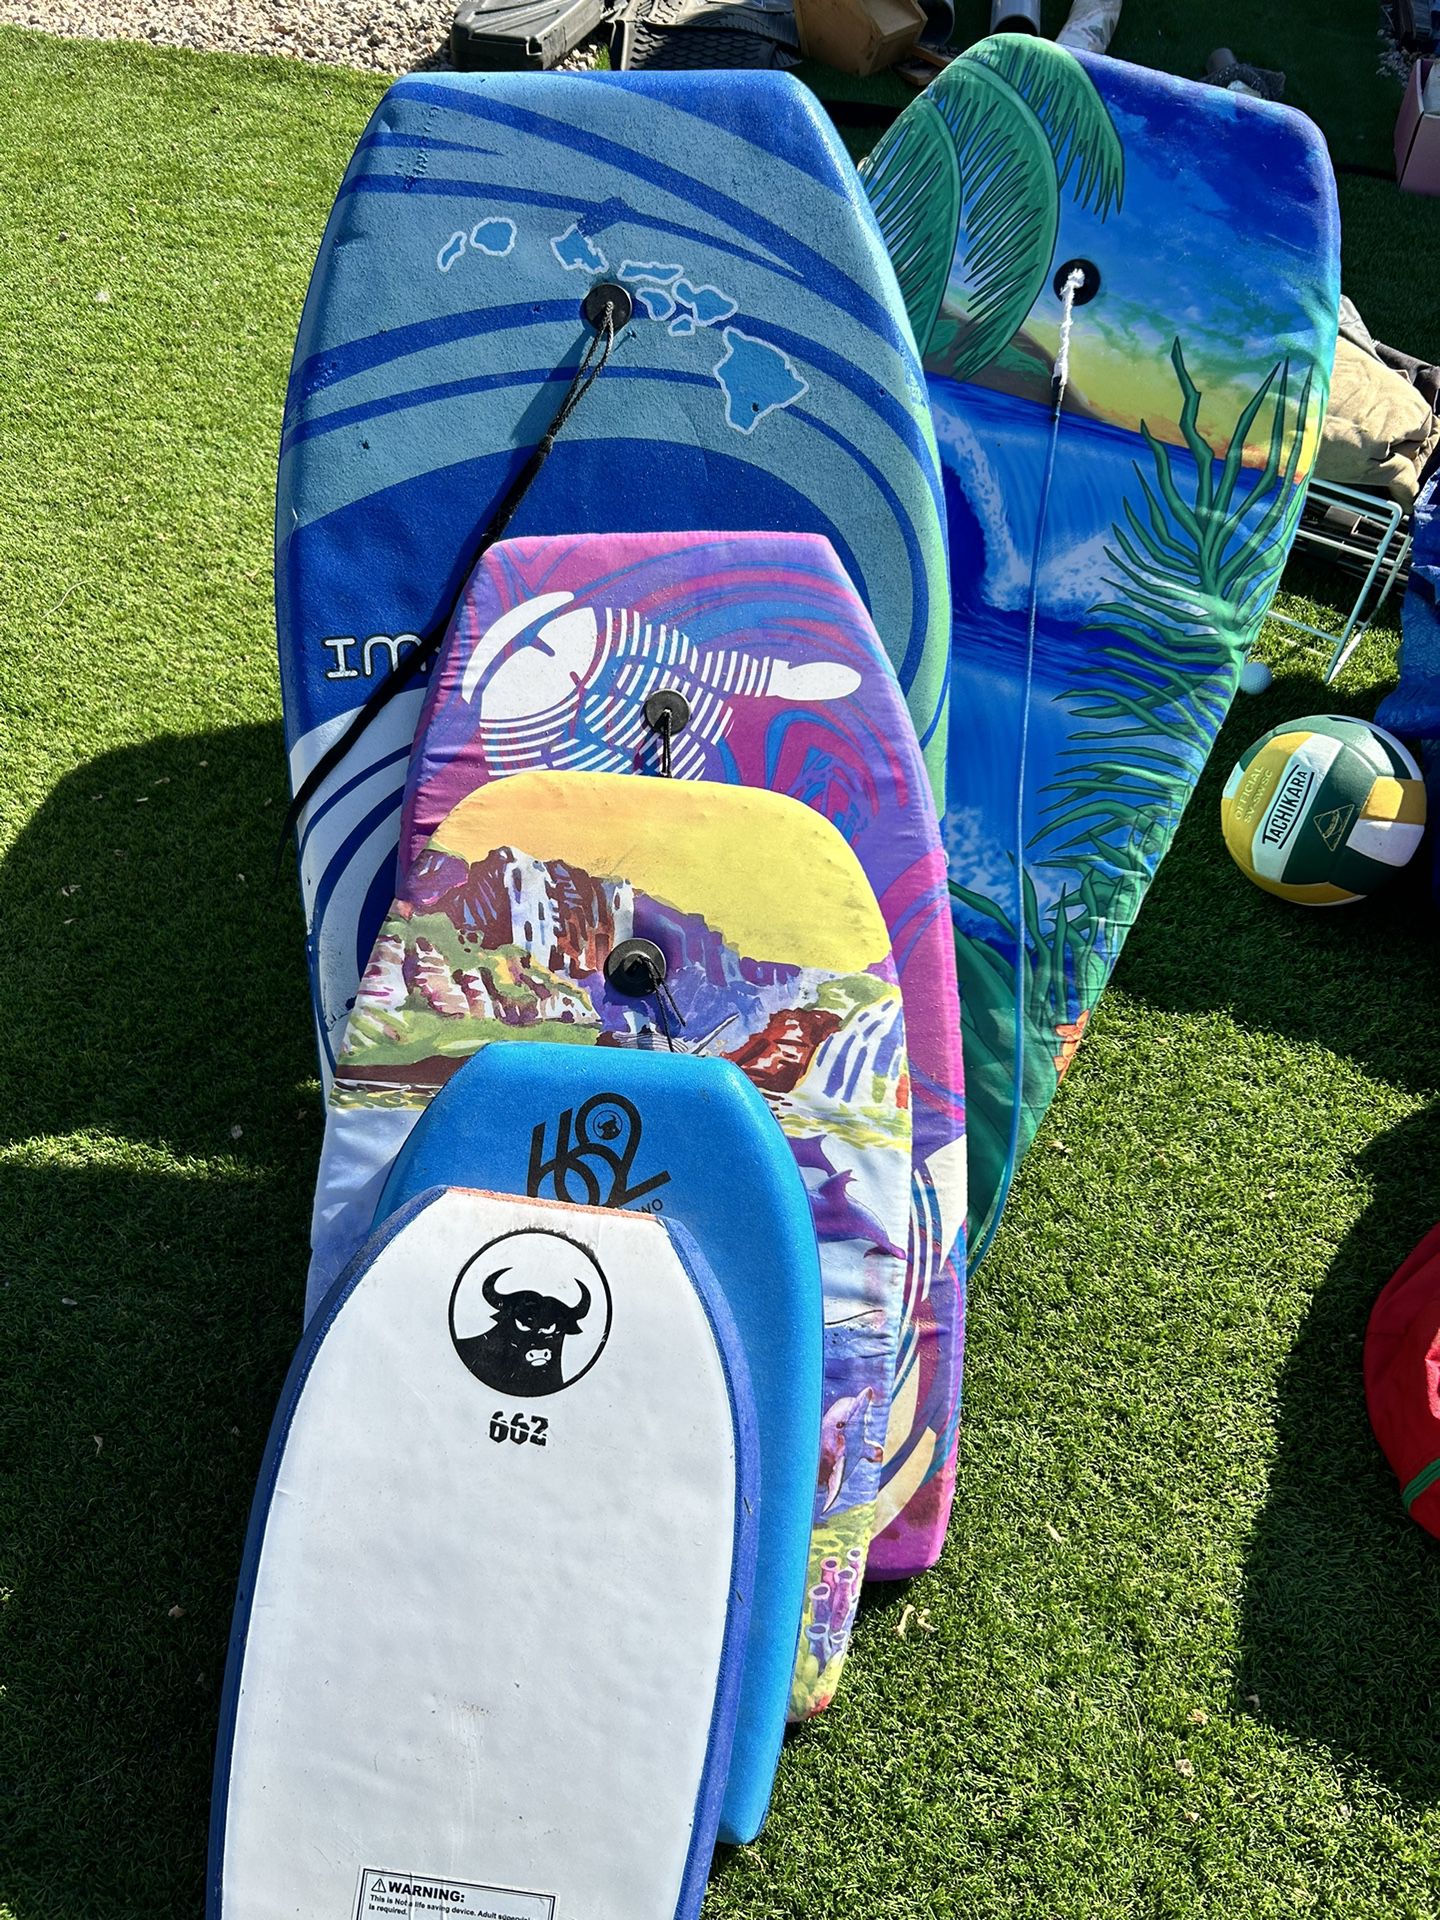 Boogie boards -  6 Total - 2 Large -2 Medium And 2 Pool Size